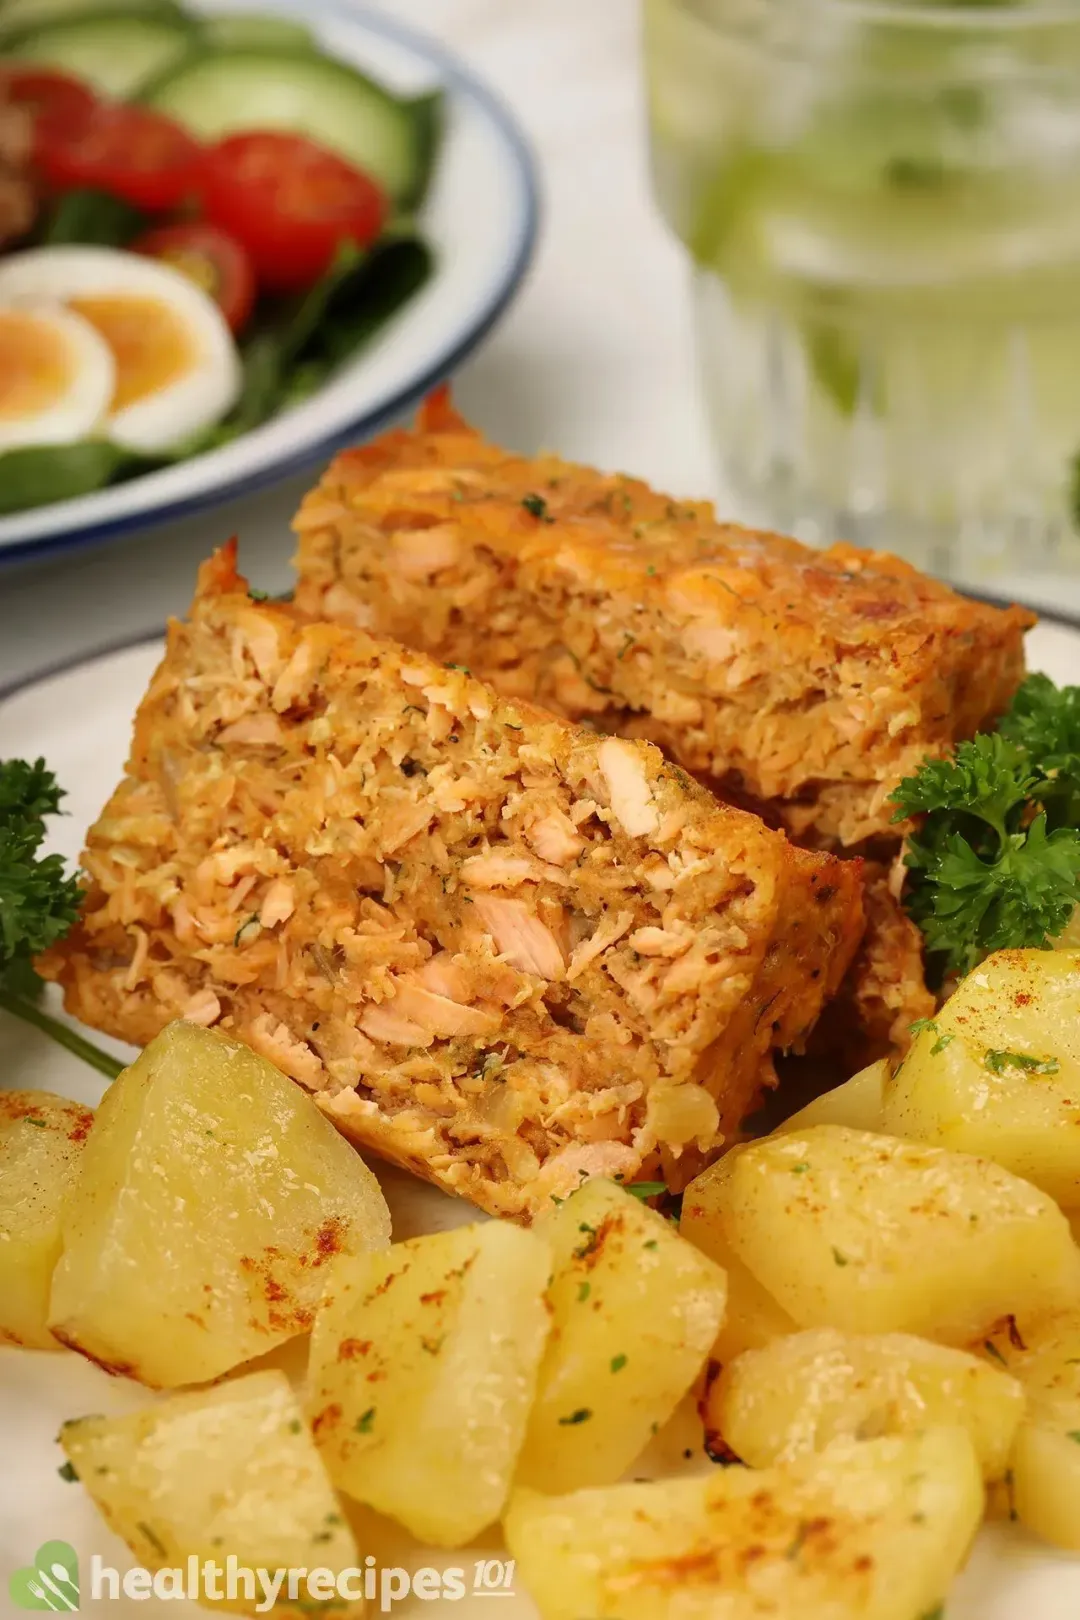 A dish containing two pieces of salmon cakes laid near small potato cubes